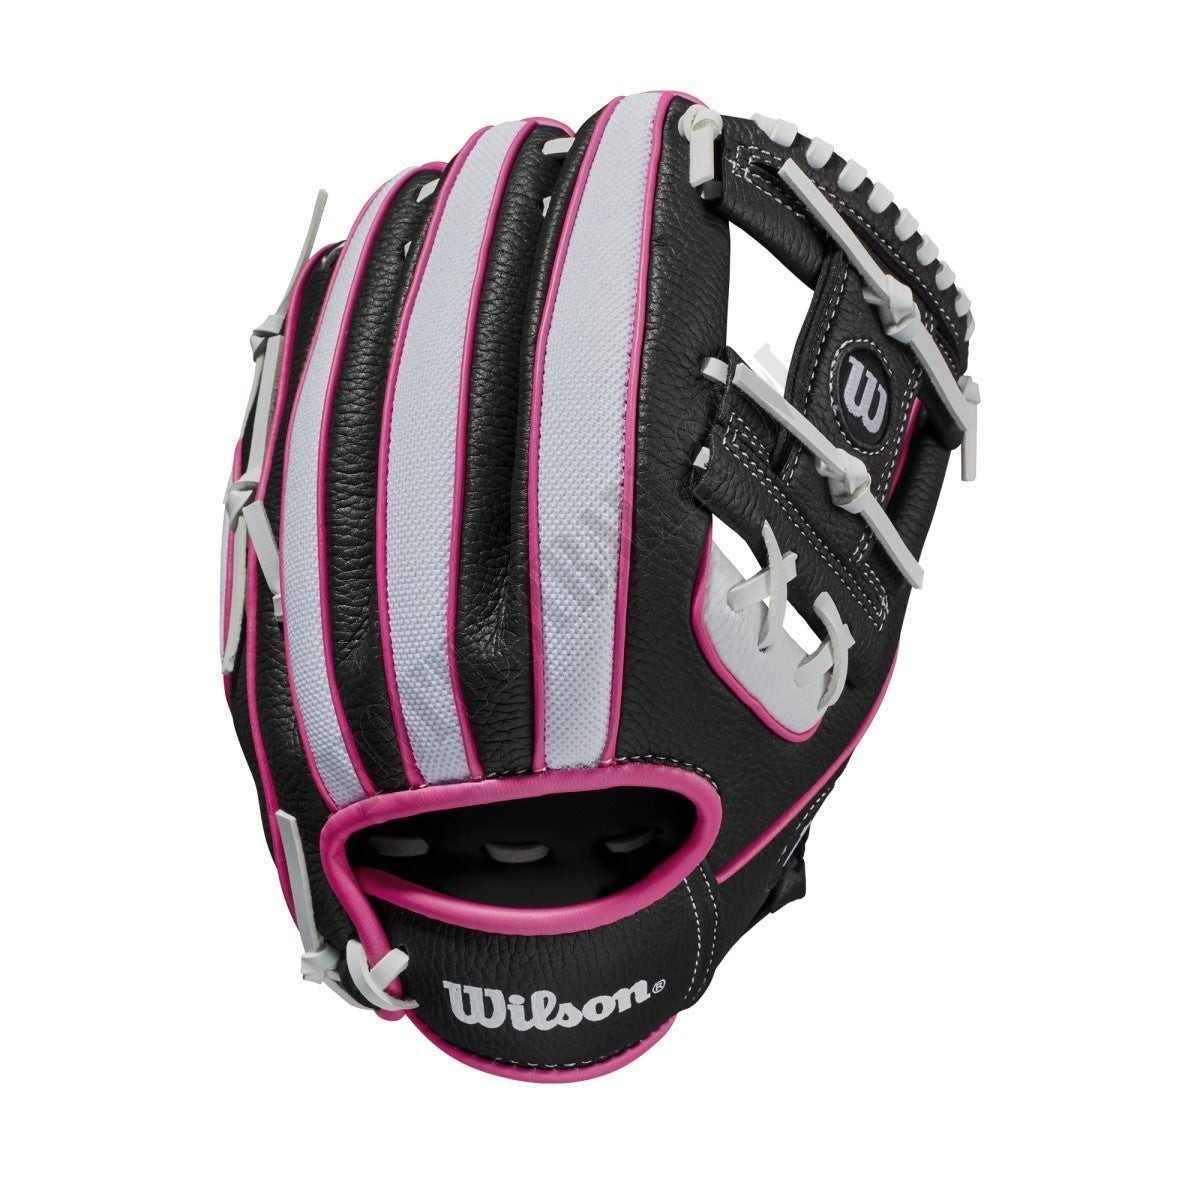 2021 A200 10" T-Ball Glove - White/Black/Pink ● Wilson Promotions - -1